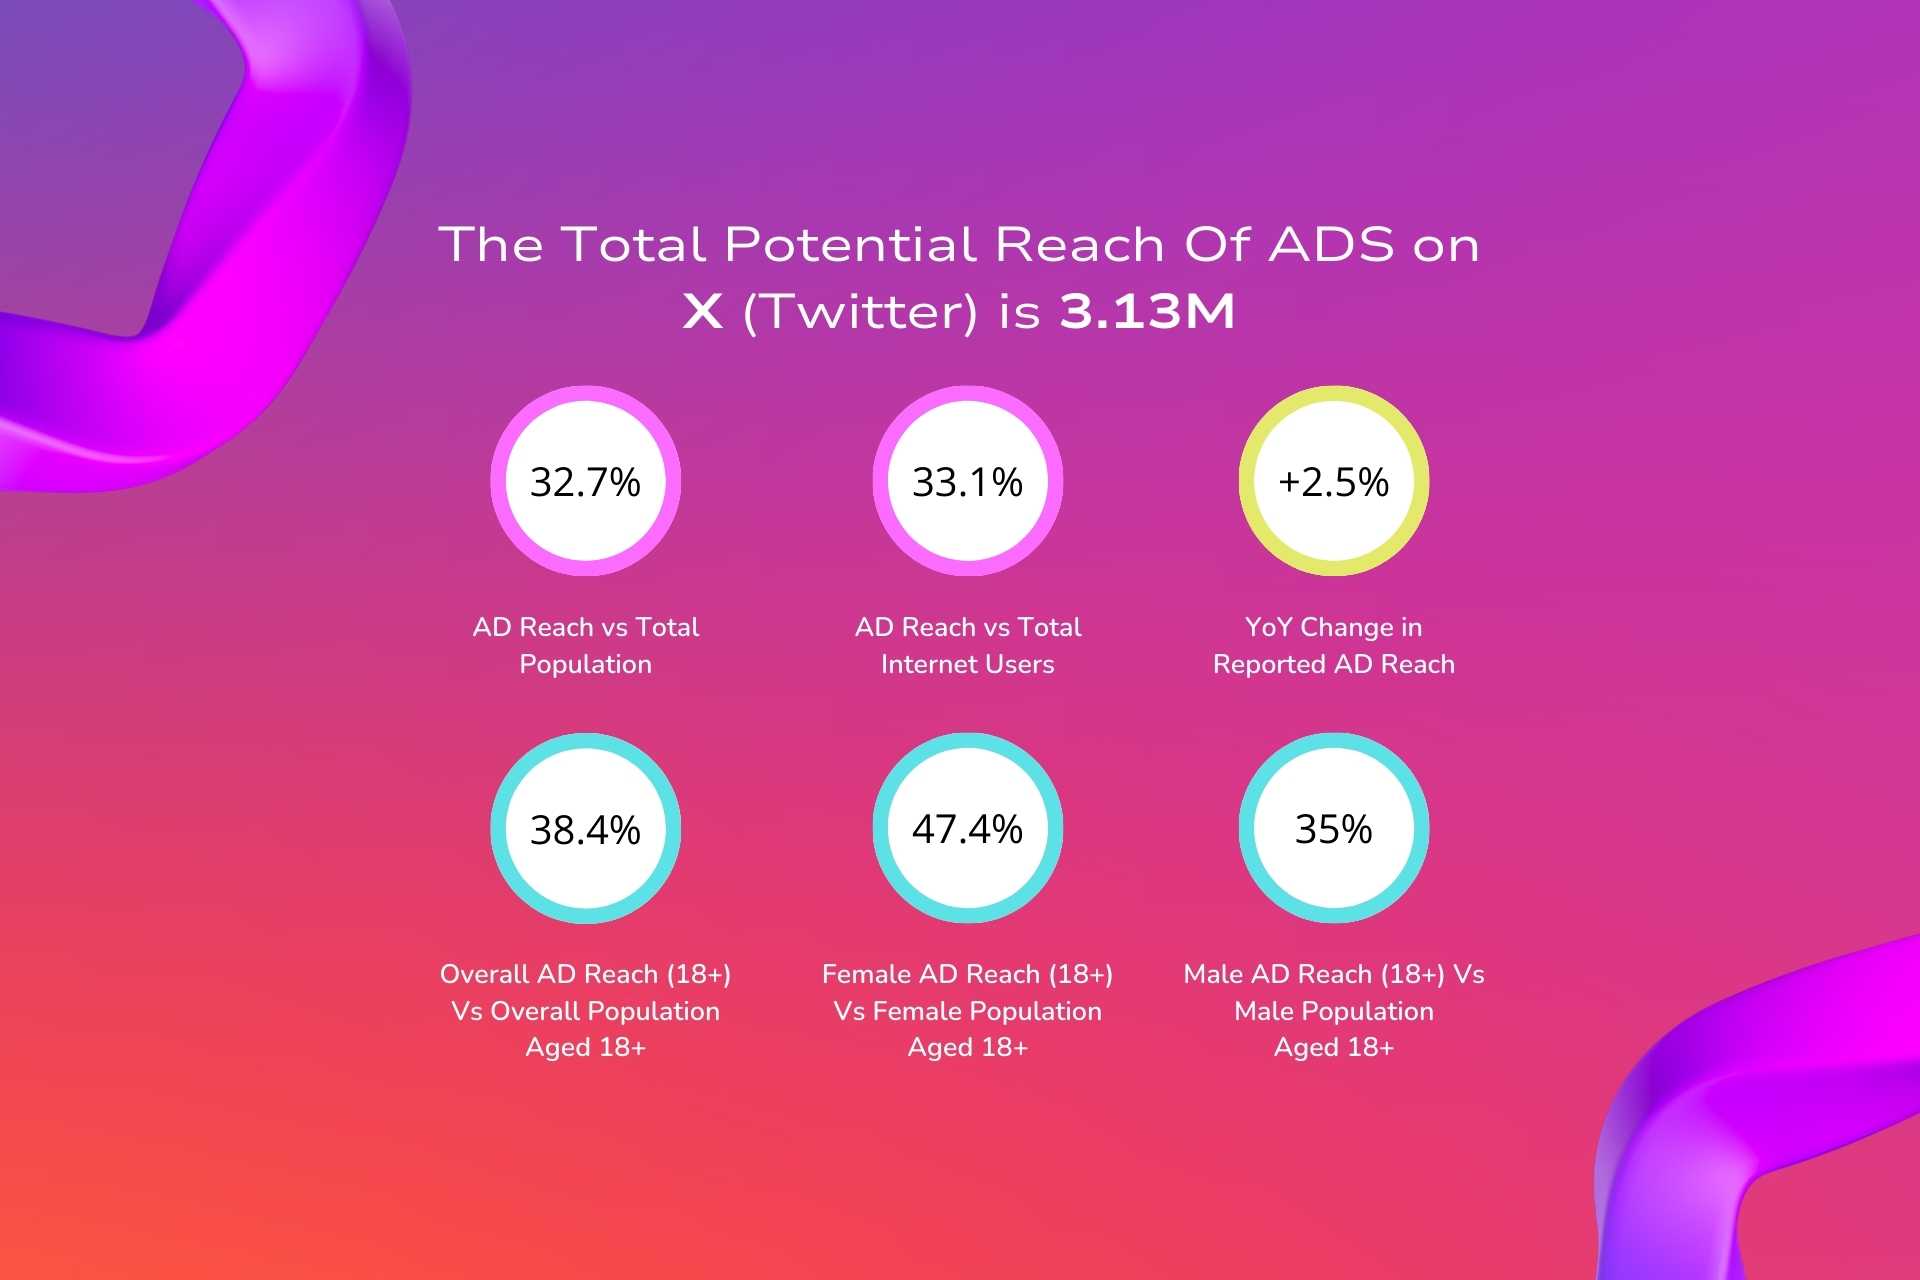 Growth of Social Media in the UAE -ADS on X (Twitter)